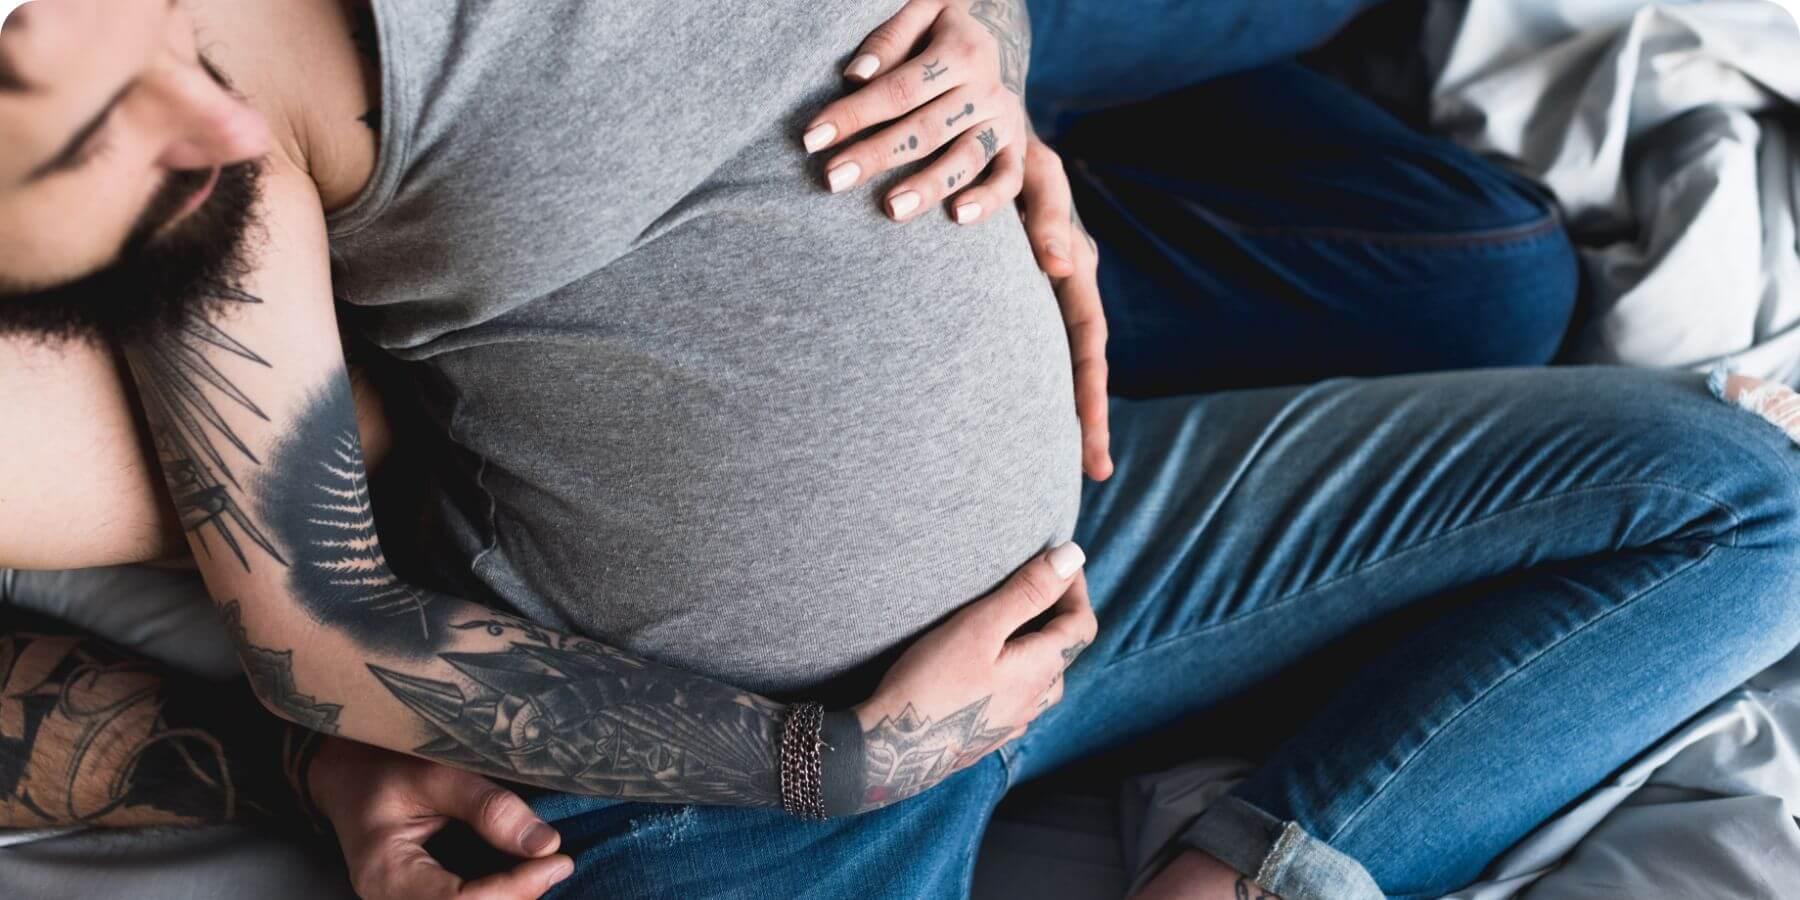 Tattoo Removal While Pregnant What to Consider  Inside Out